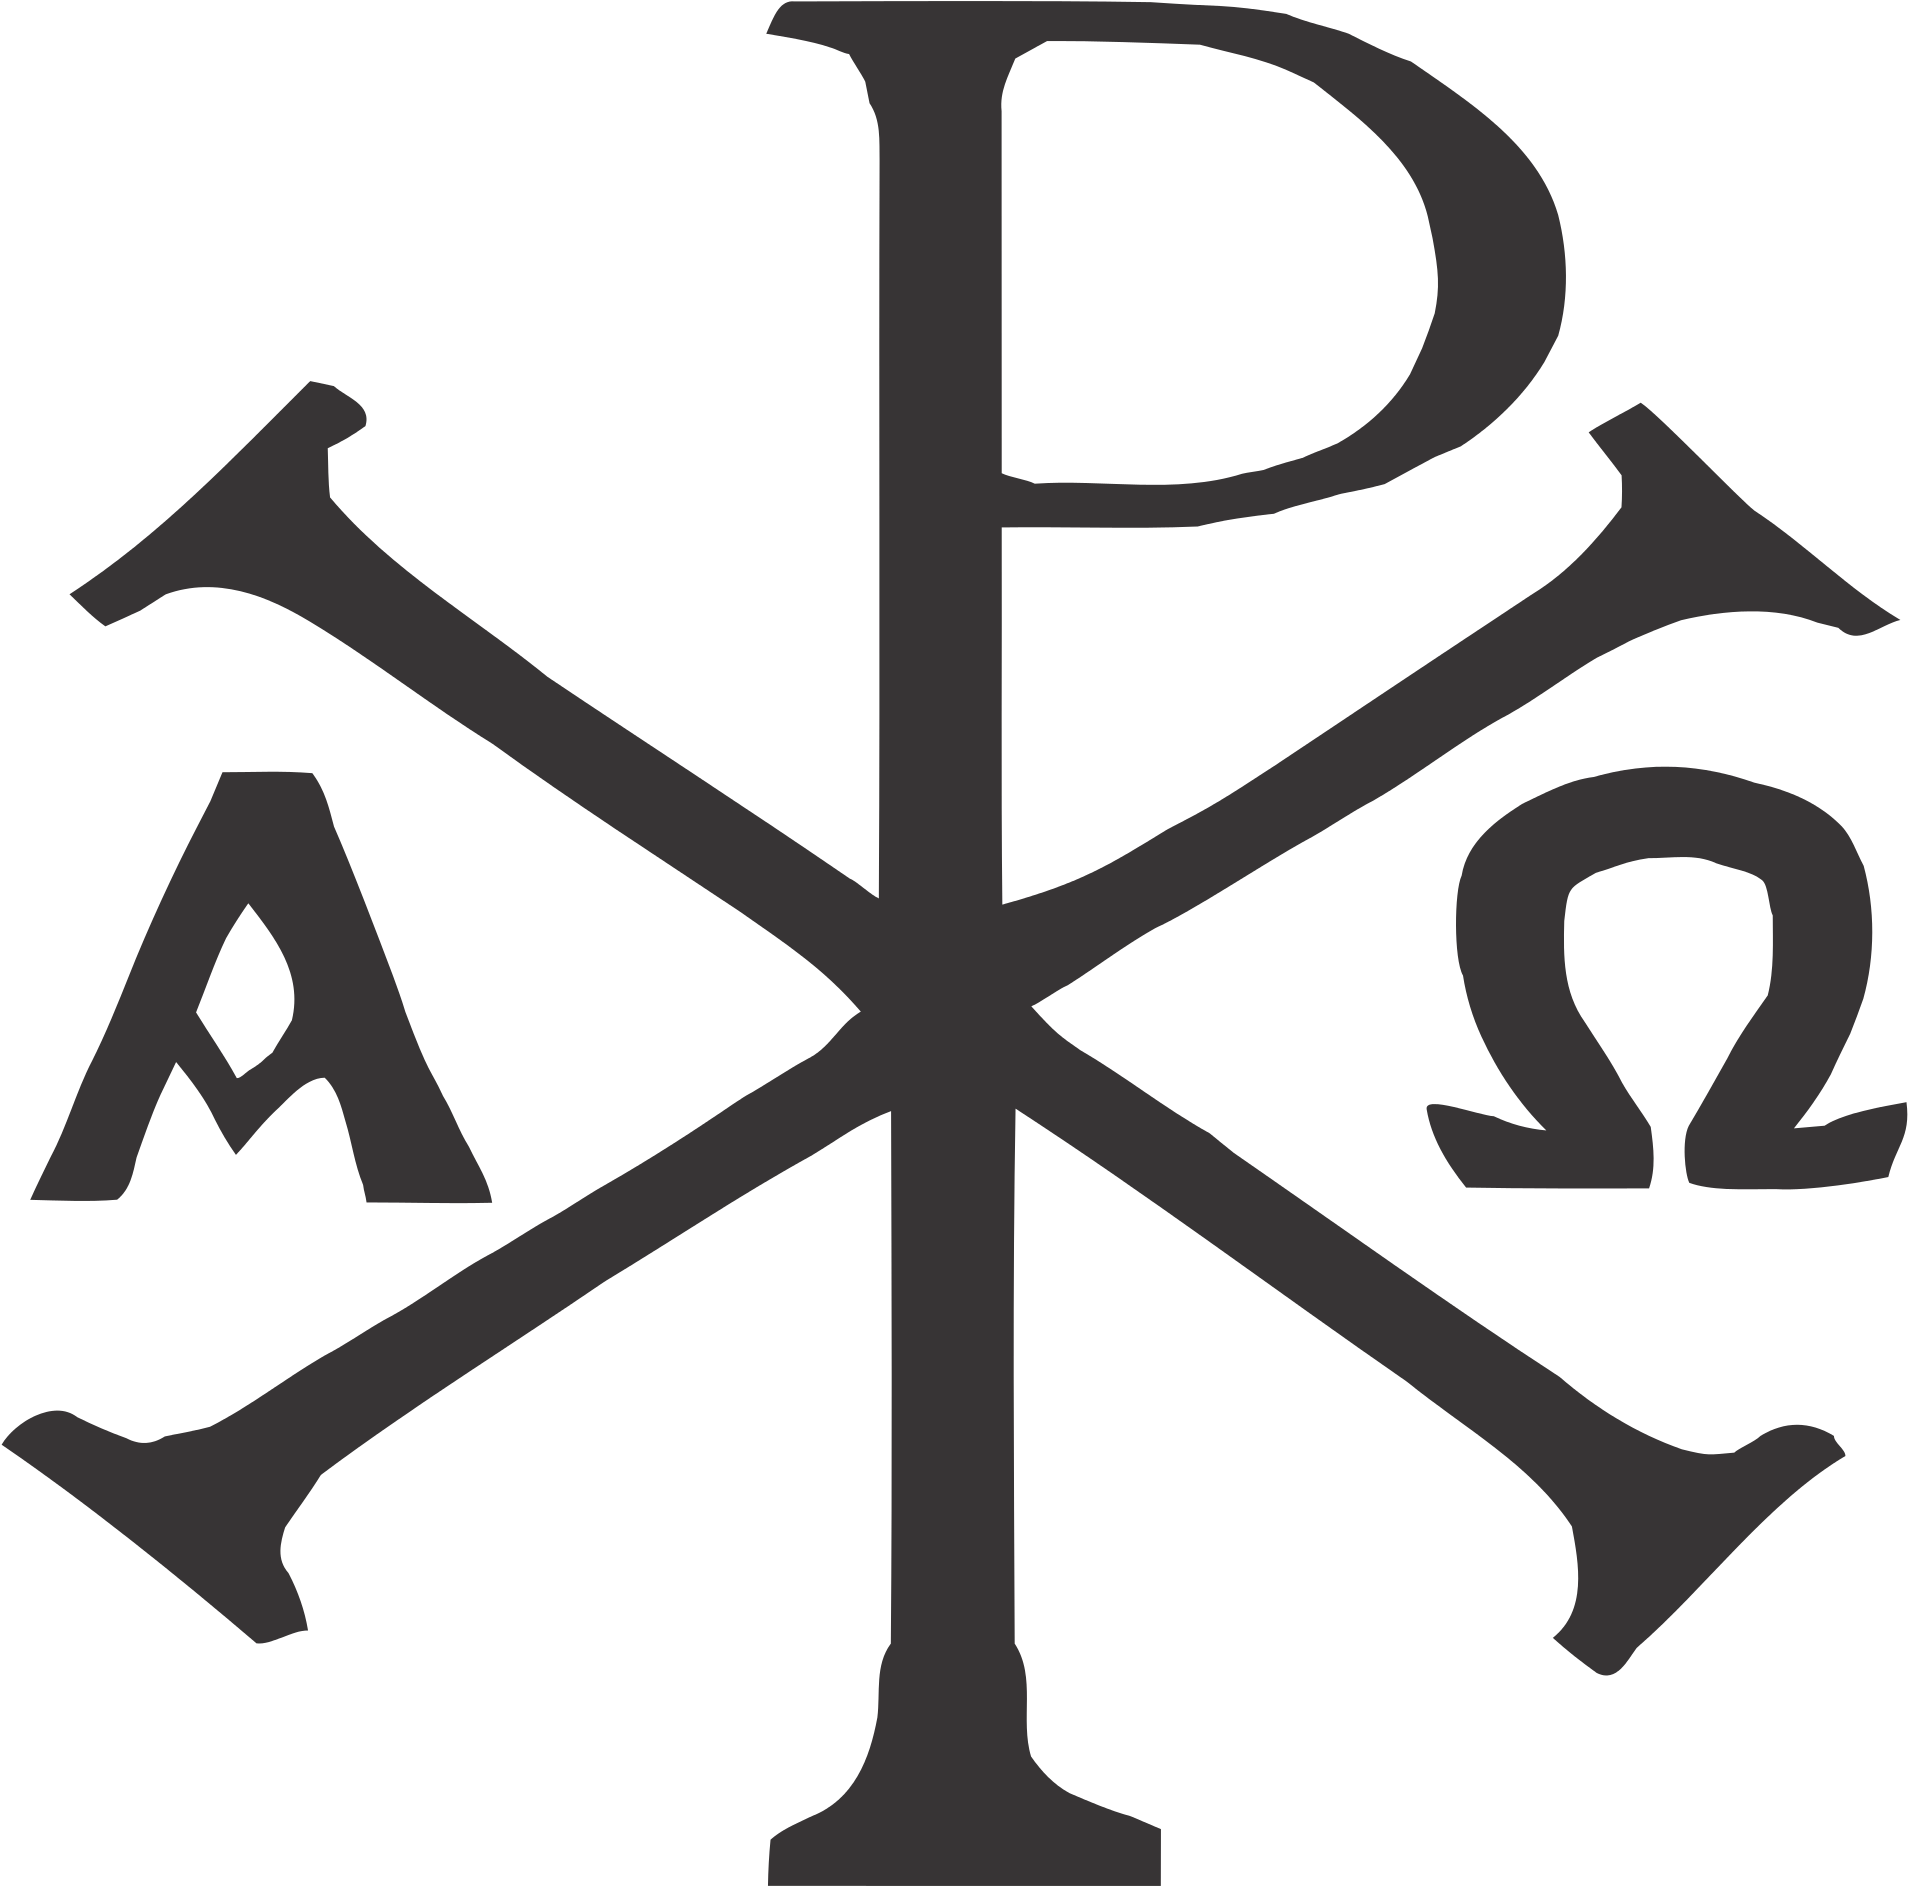 51 Chi Rho Tattoo Designs And Meanings 2023  Spiritustattoocom  Chi  rho tattoo Tattoo designs and meanings Tattoos